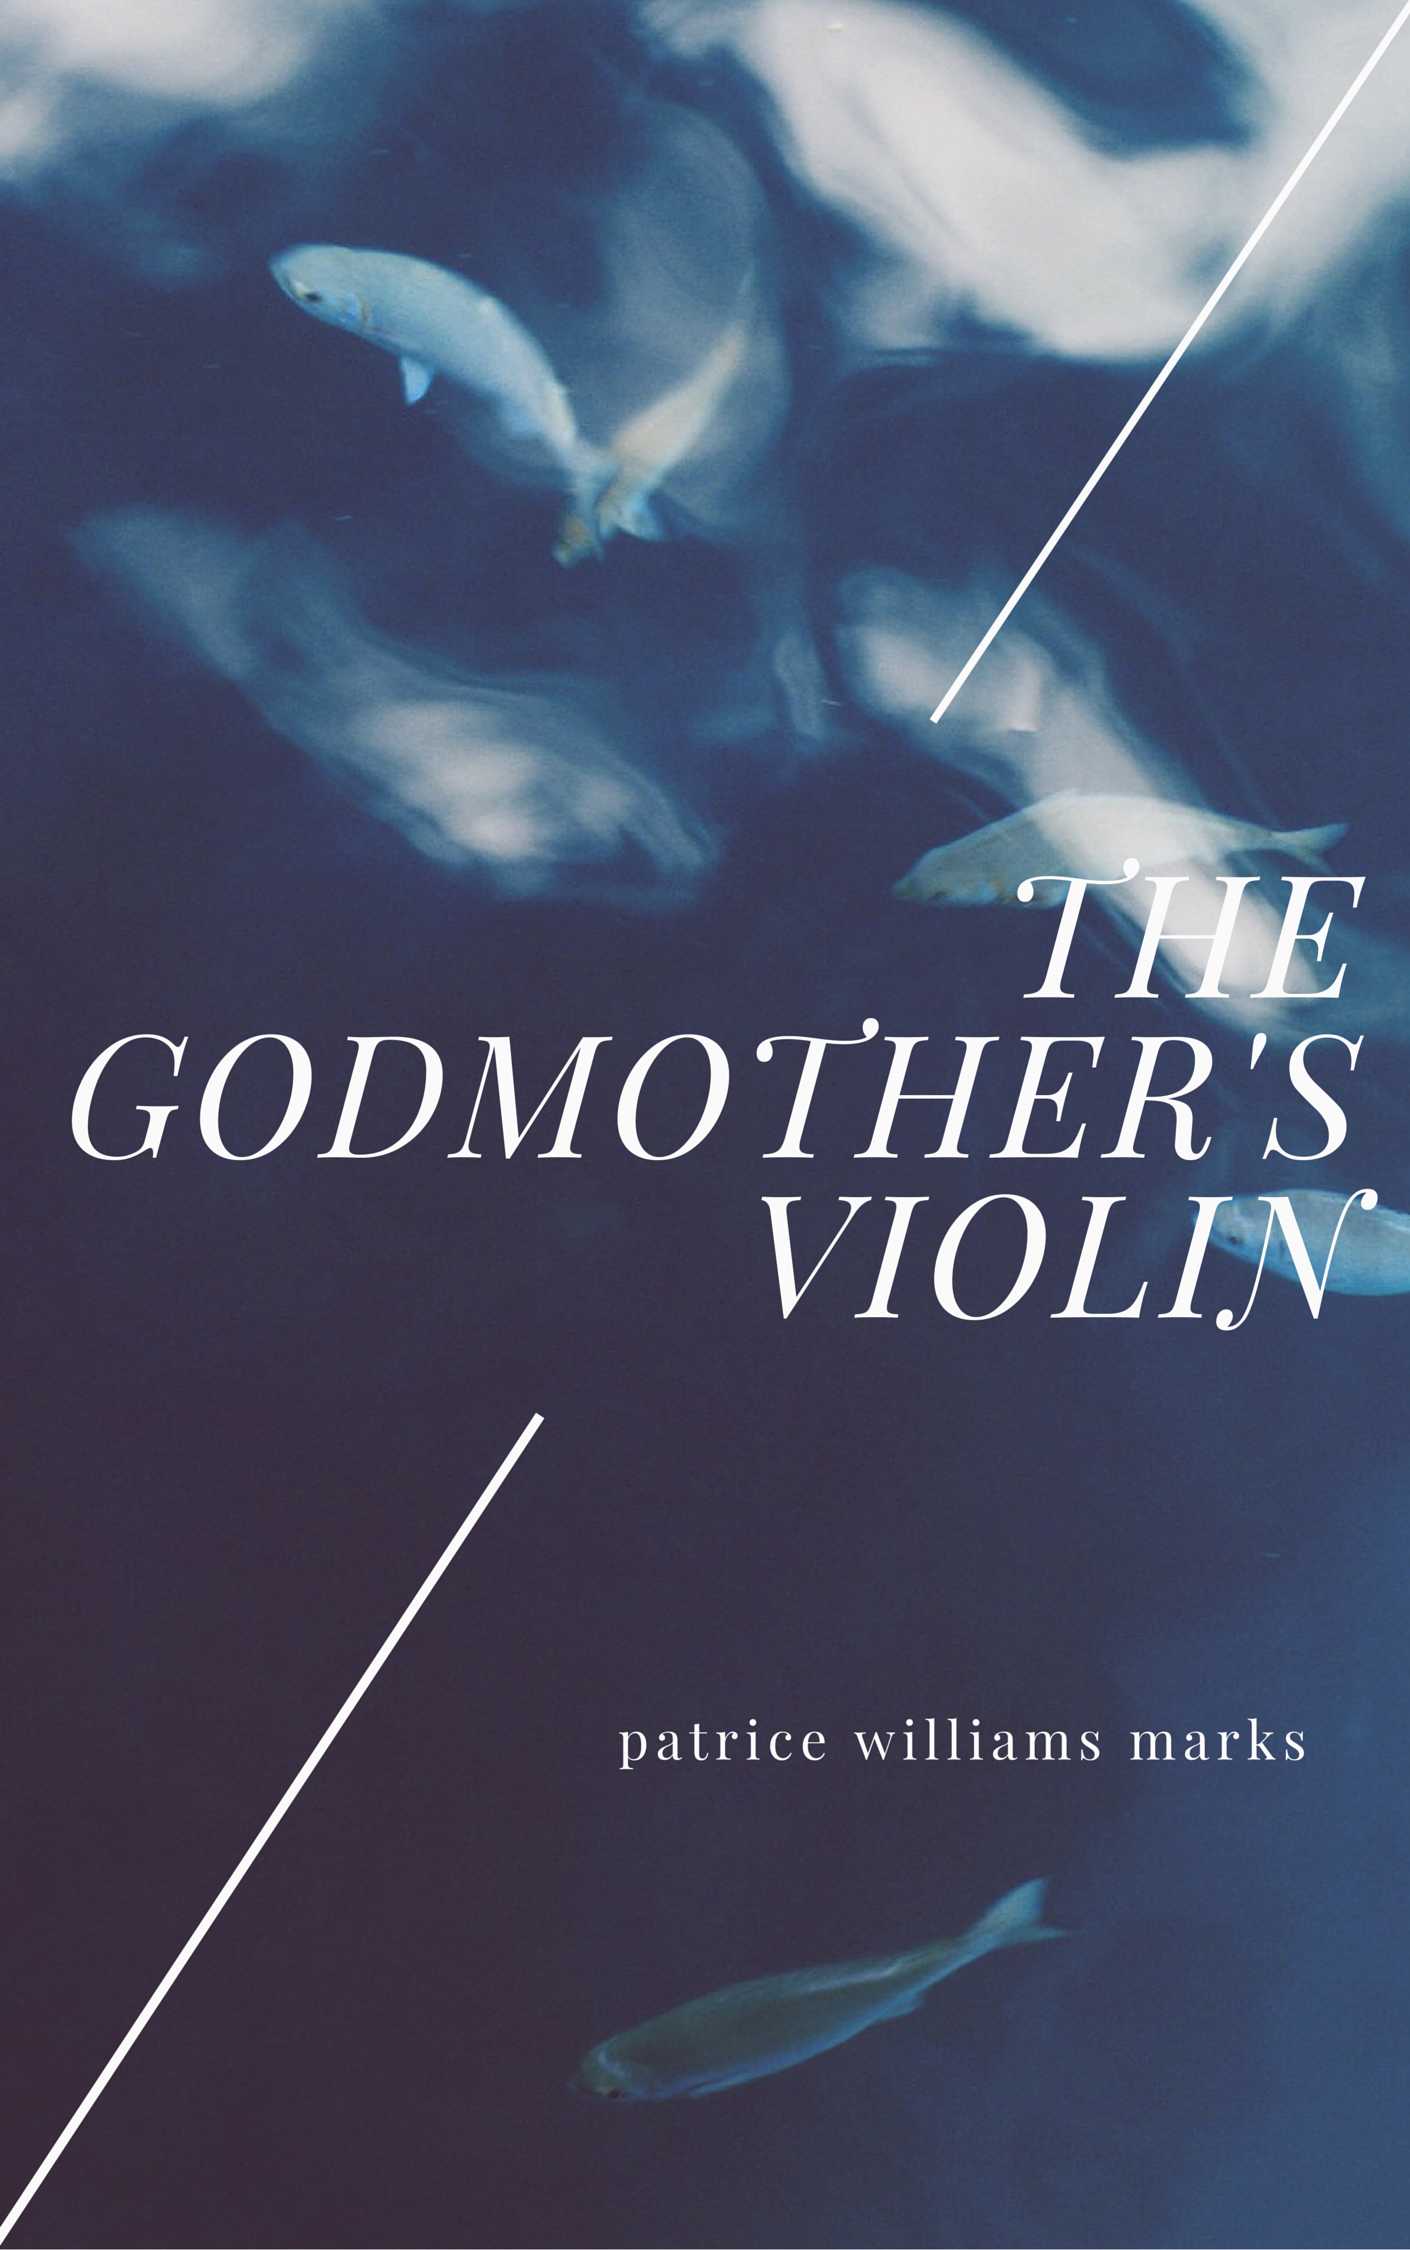 THE GODMOTHER'S VIOLIN